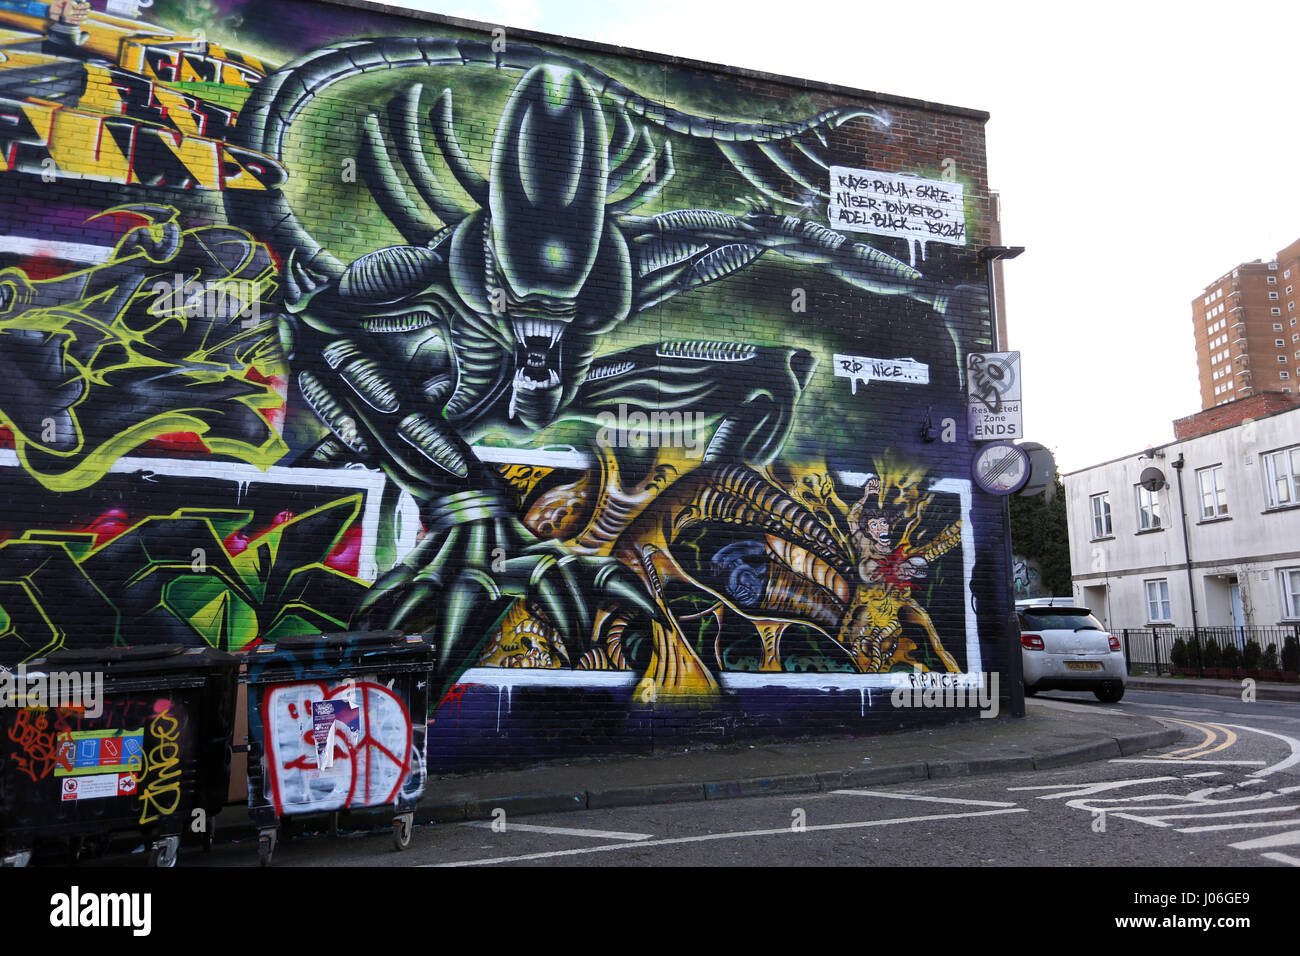 Graffiti in the style of the Alien movies in Brighton, East Sussex, UK. Stock Photo